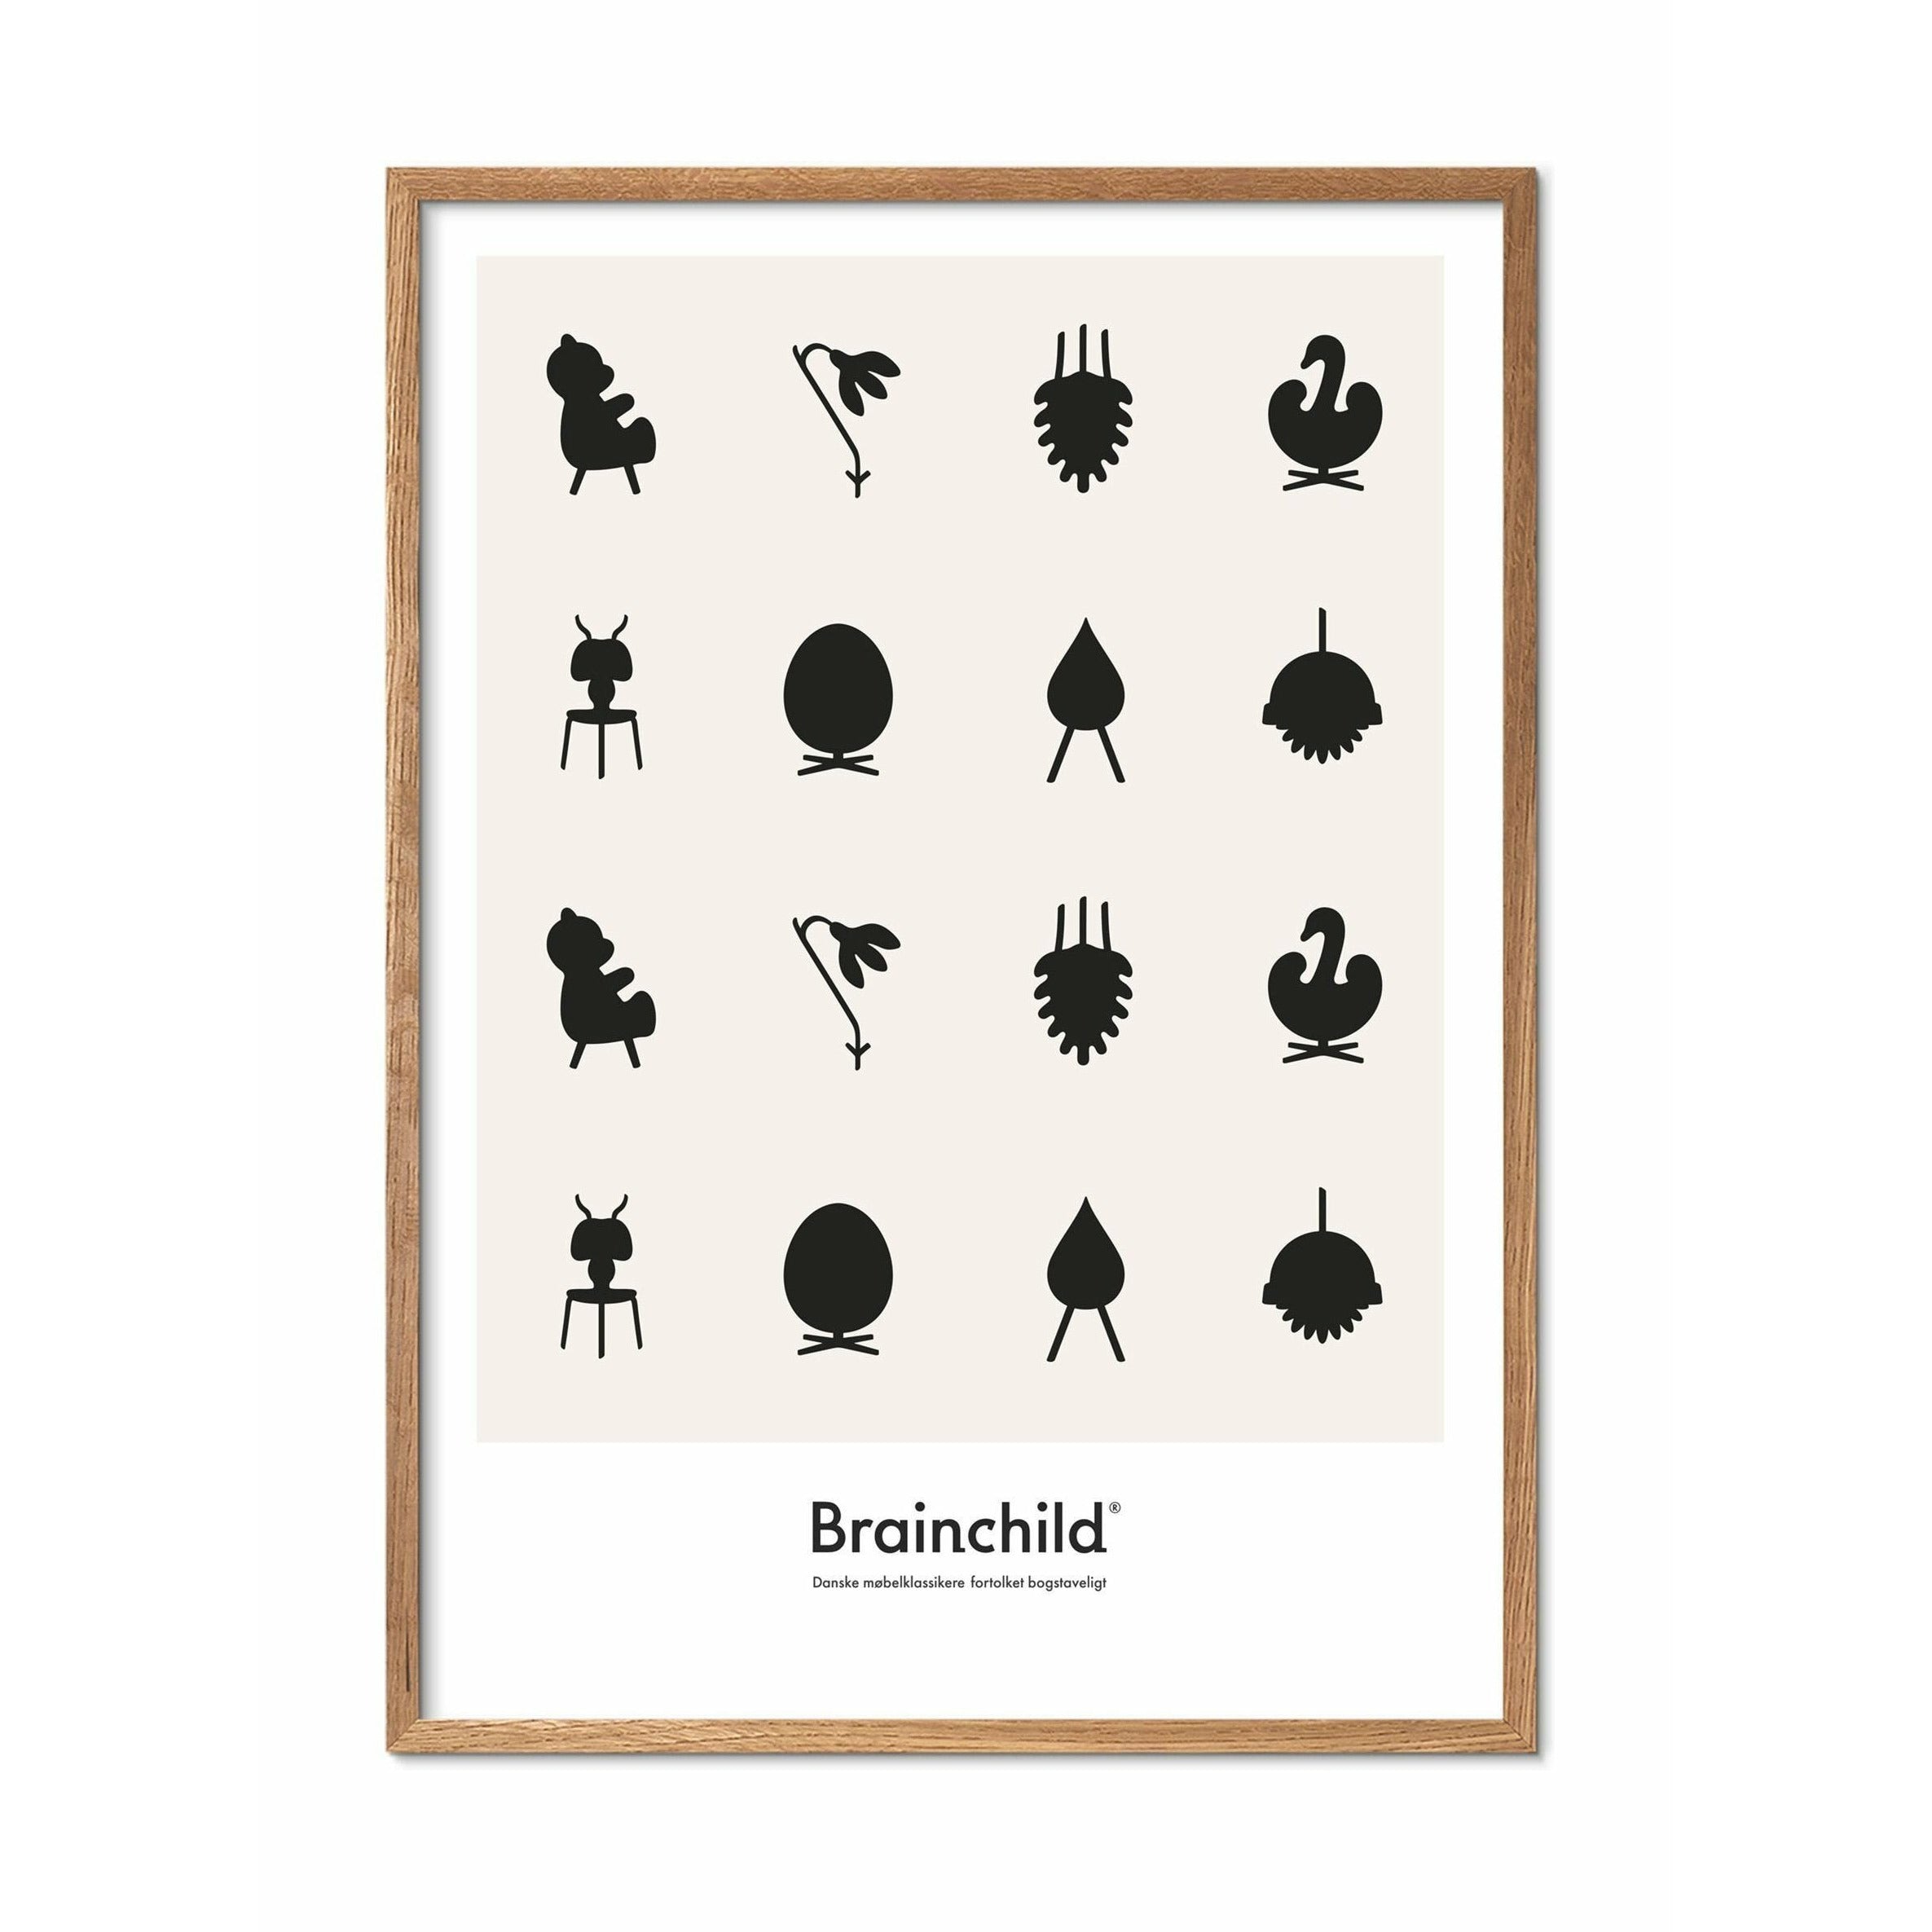 Brainchild Design Icon Poster, Frame Made Of Light Wood A5, Grey